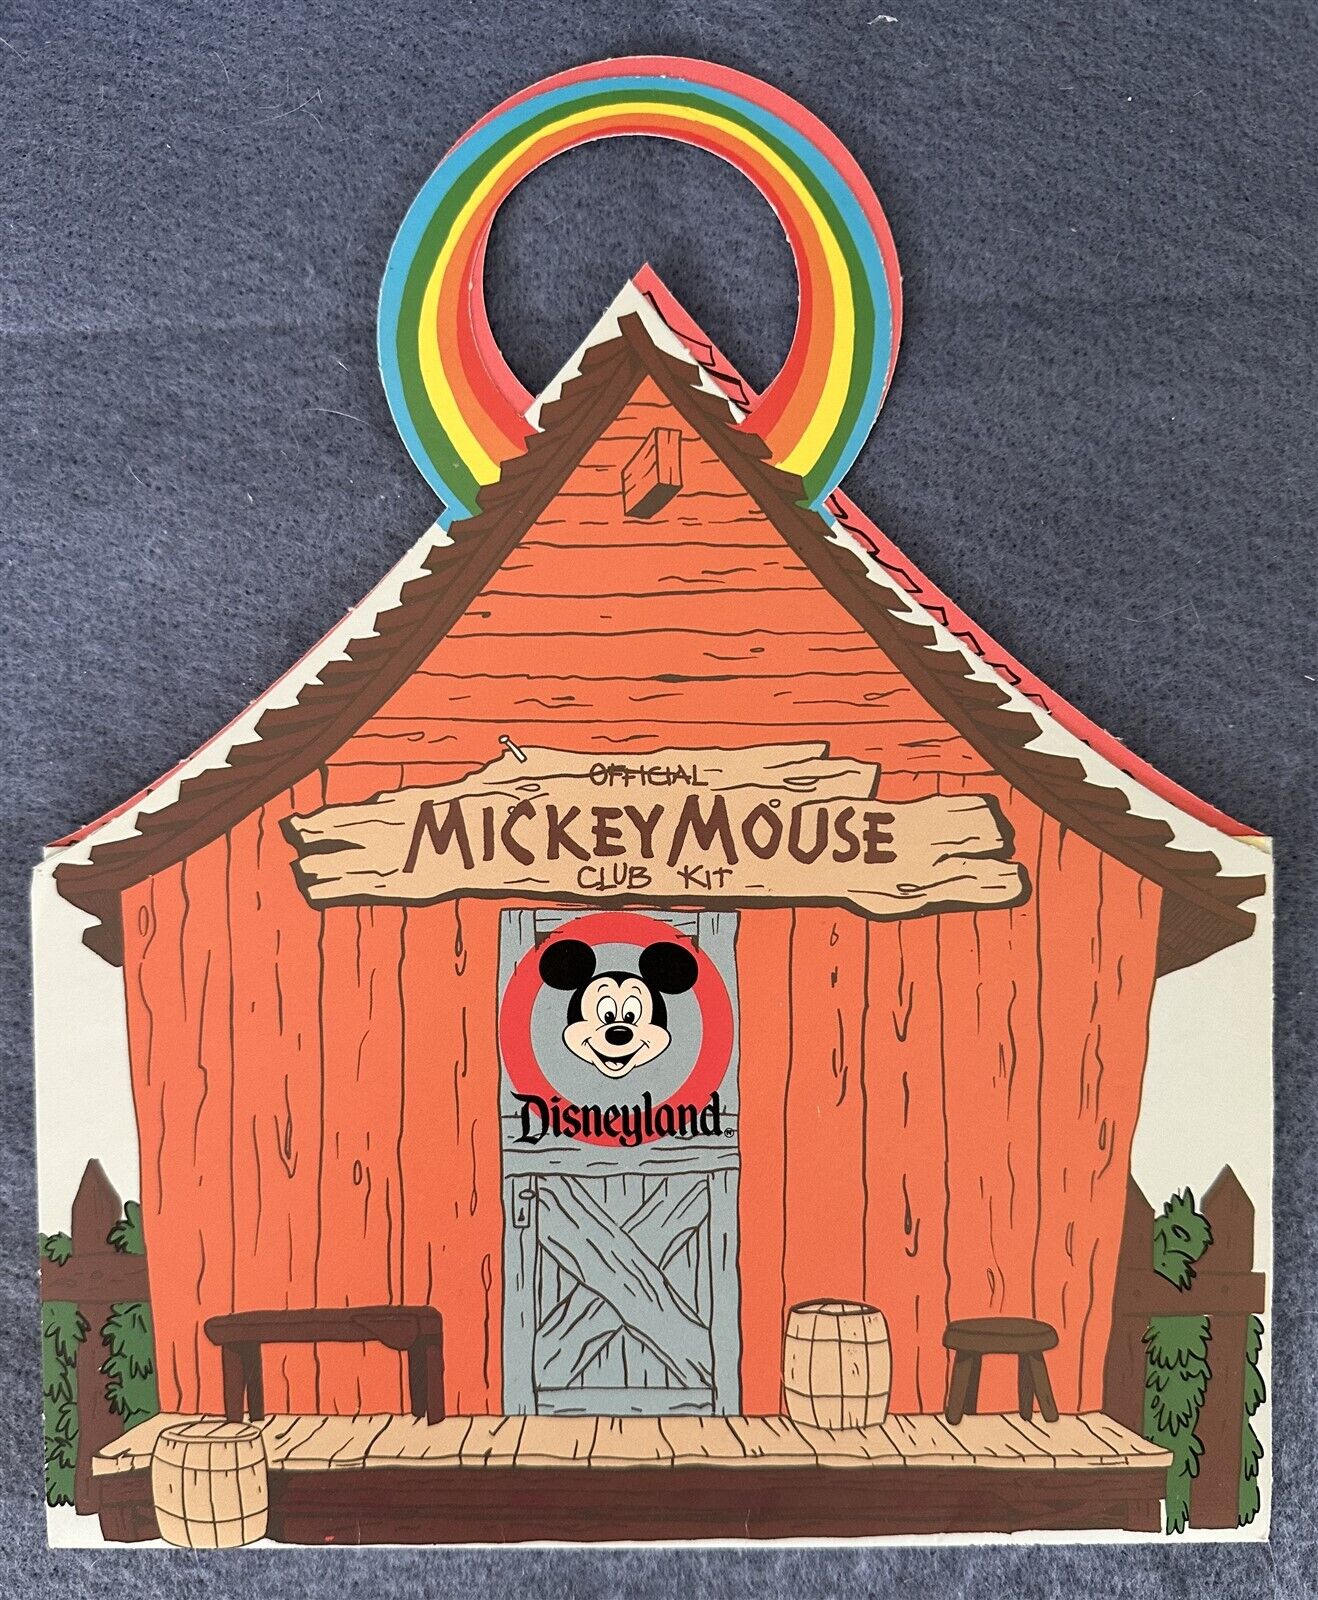 Disneyland WDP OFFICIAL MICKEY MOUSE CLUB KIT 1985 Mint Unused